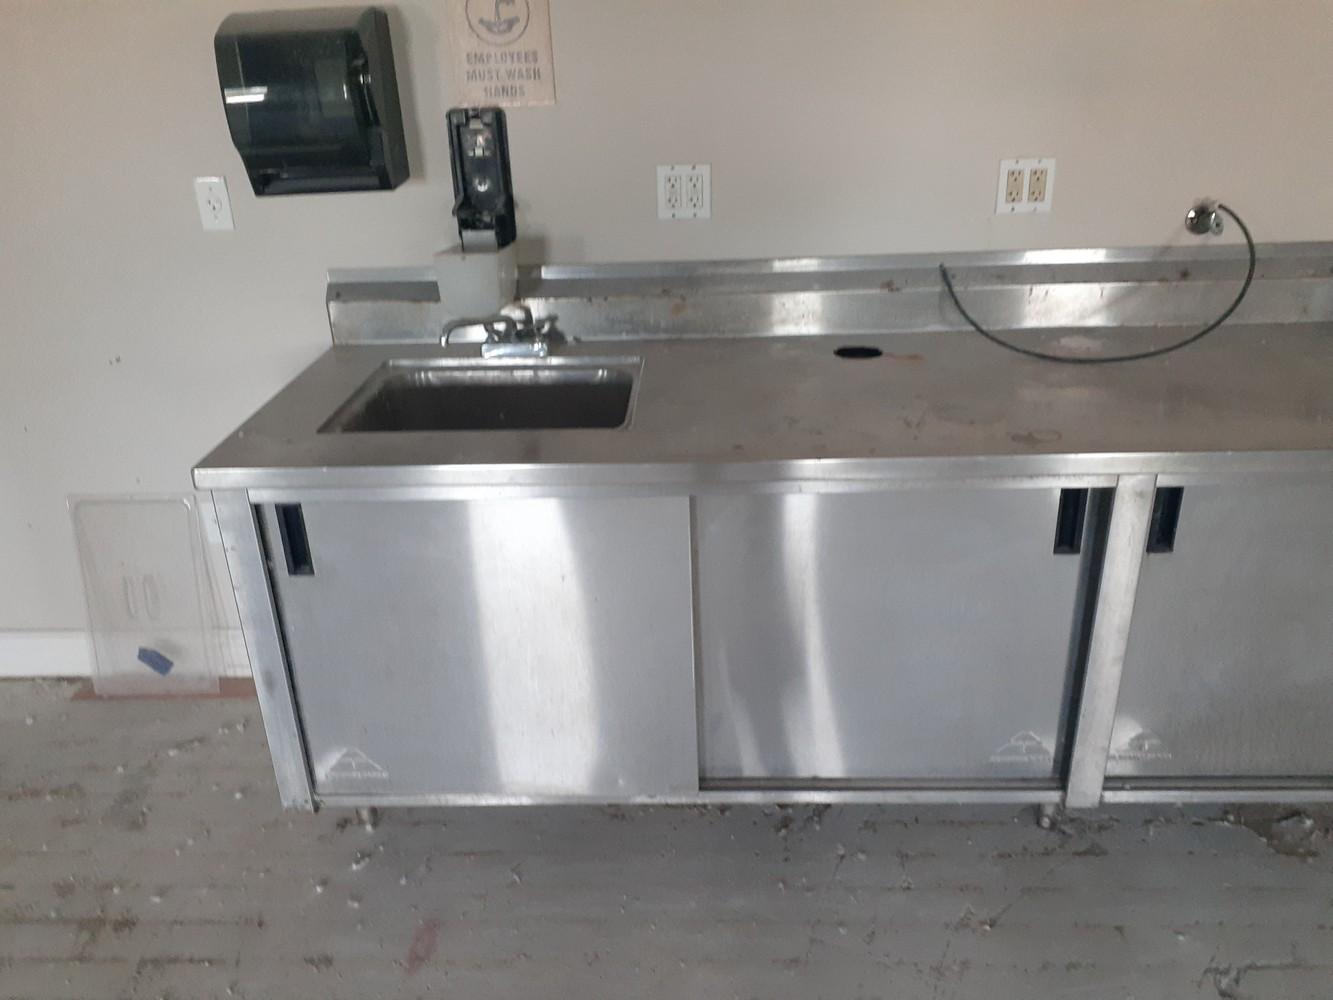 Approx. 10 Ft Stainless Steel Waitress Station w Ice bin, water spout